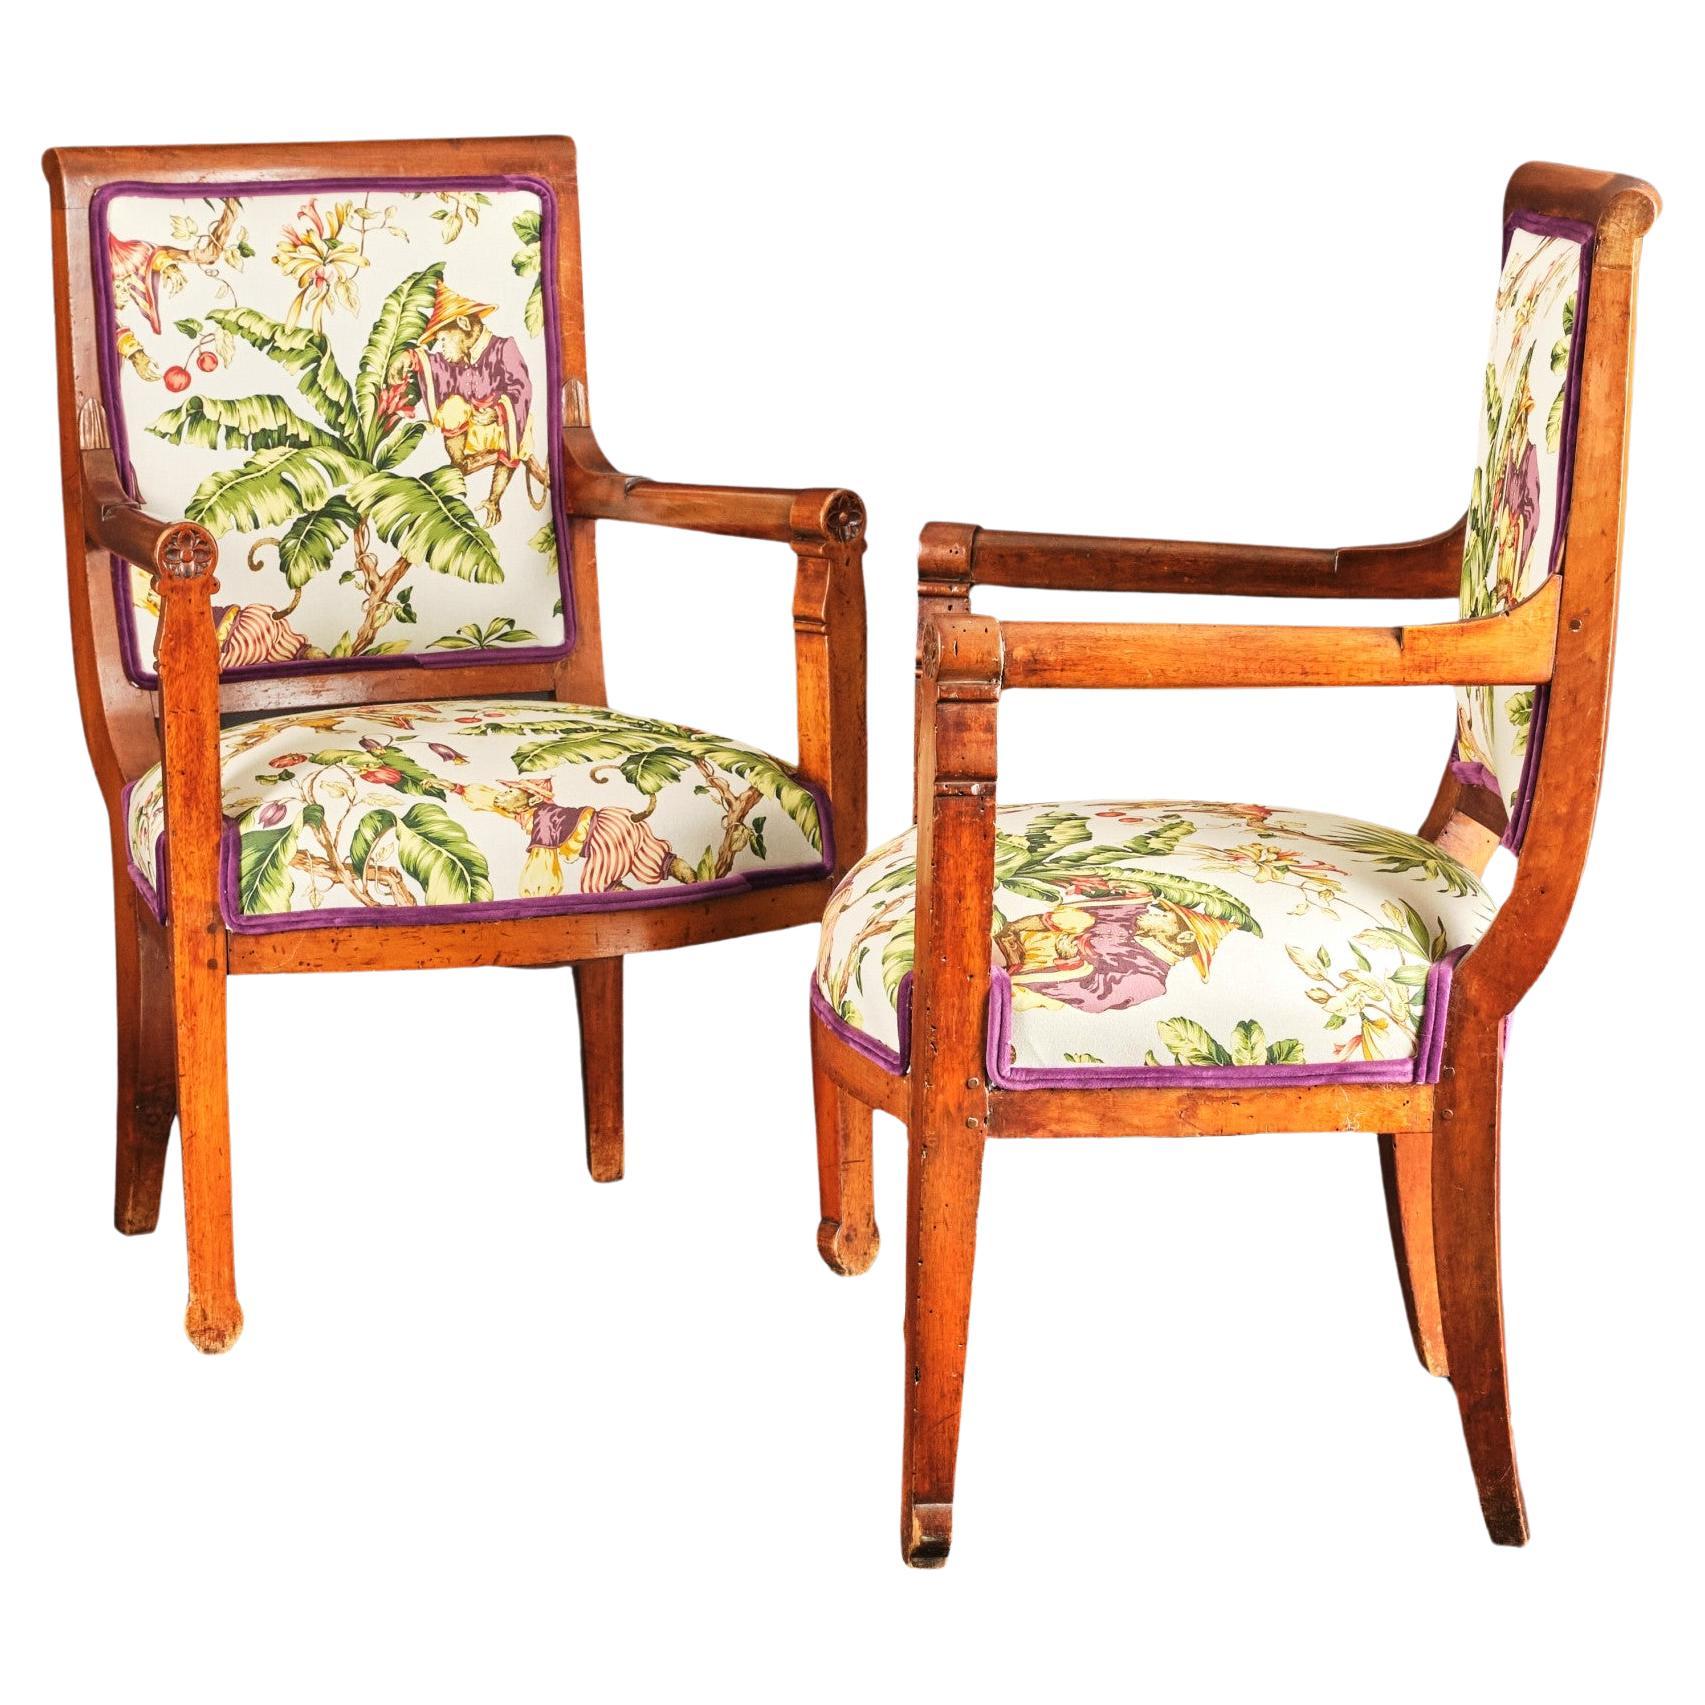 A Fine Pair of Early 19th Century Charles X Period Walnut Fauteuils, Circa 1835 For Sale